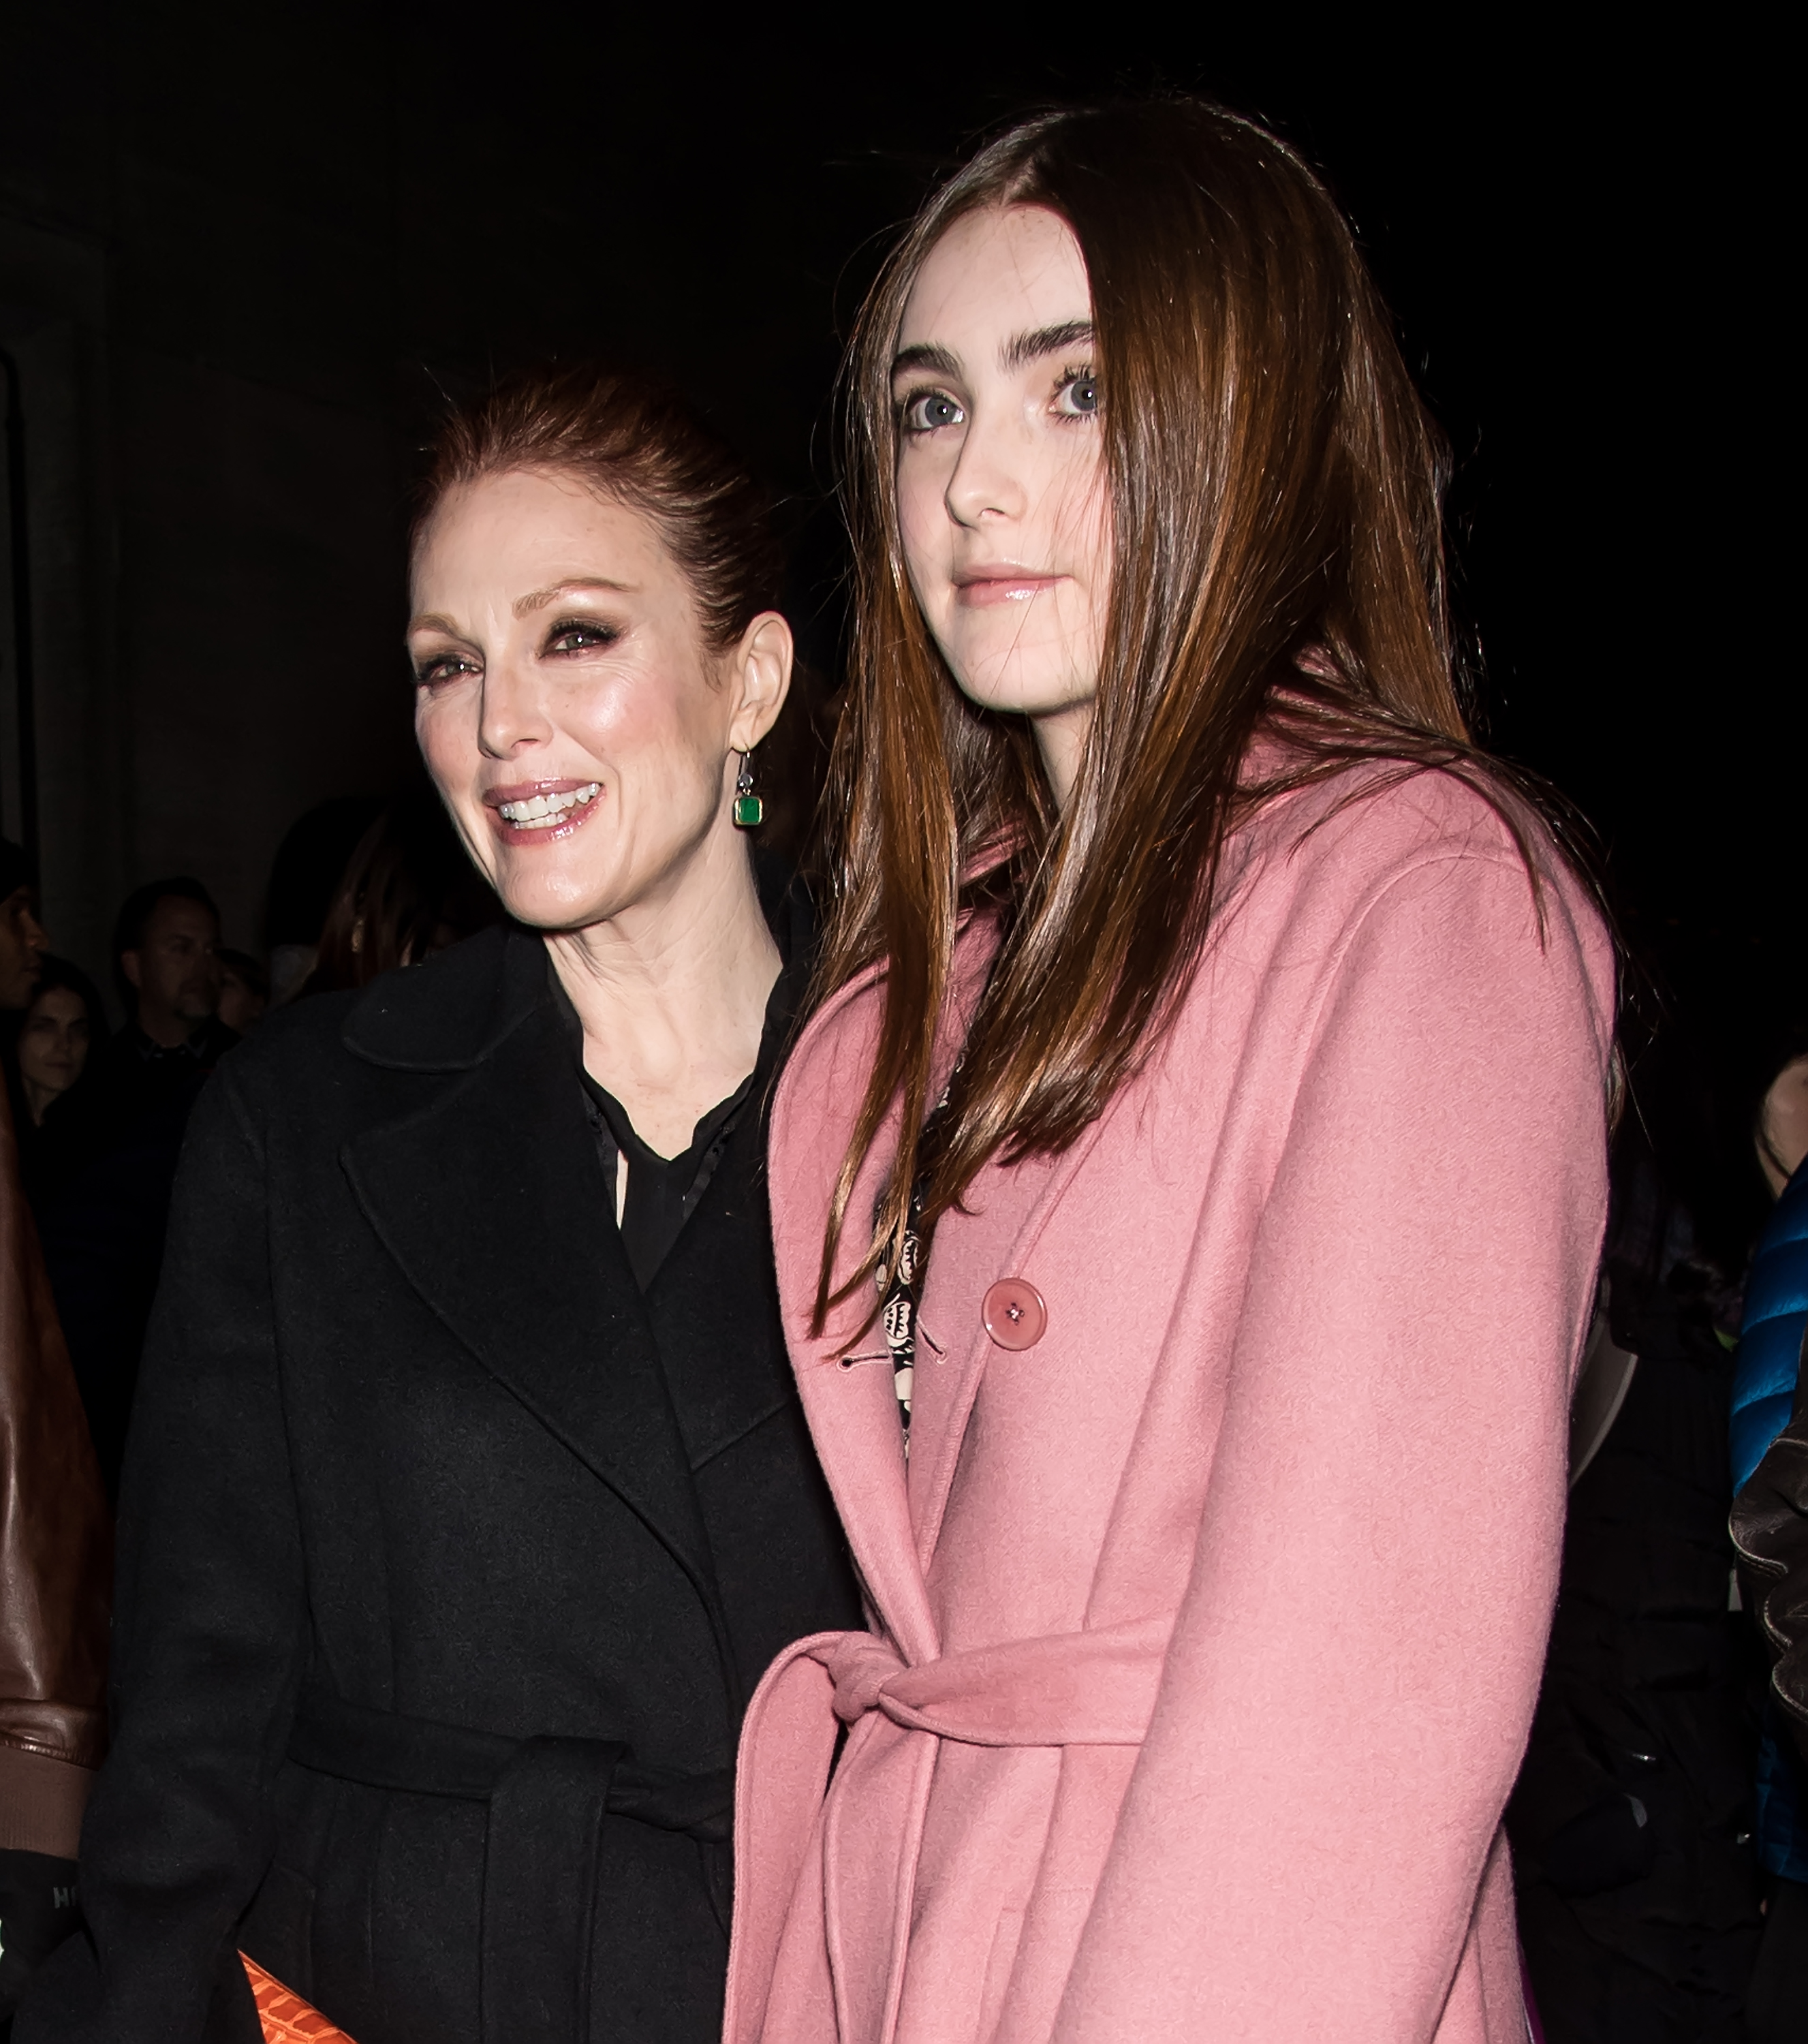 Julianne Moore and Liv Freundlich at the Bottega Veneta fashion show in New York City on February 9, 2018 | Source: Getty Images